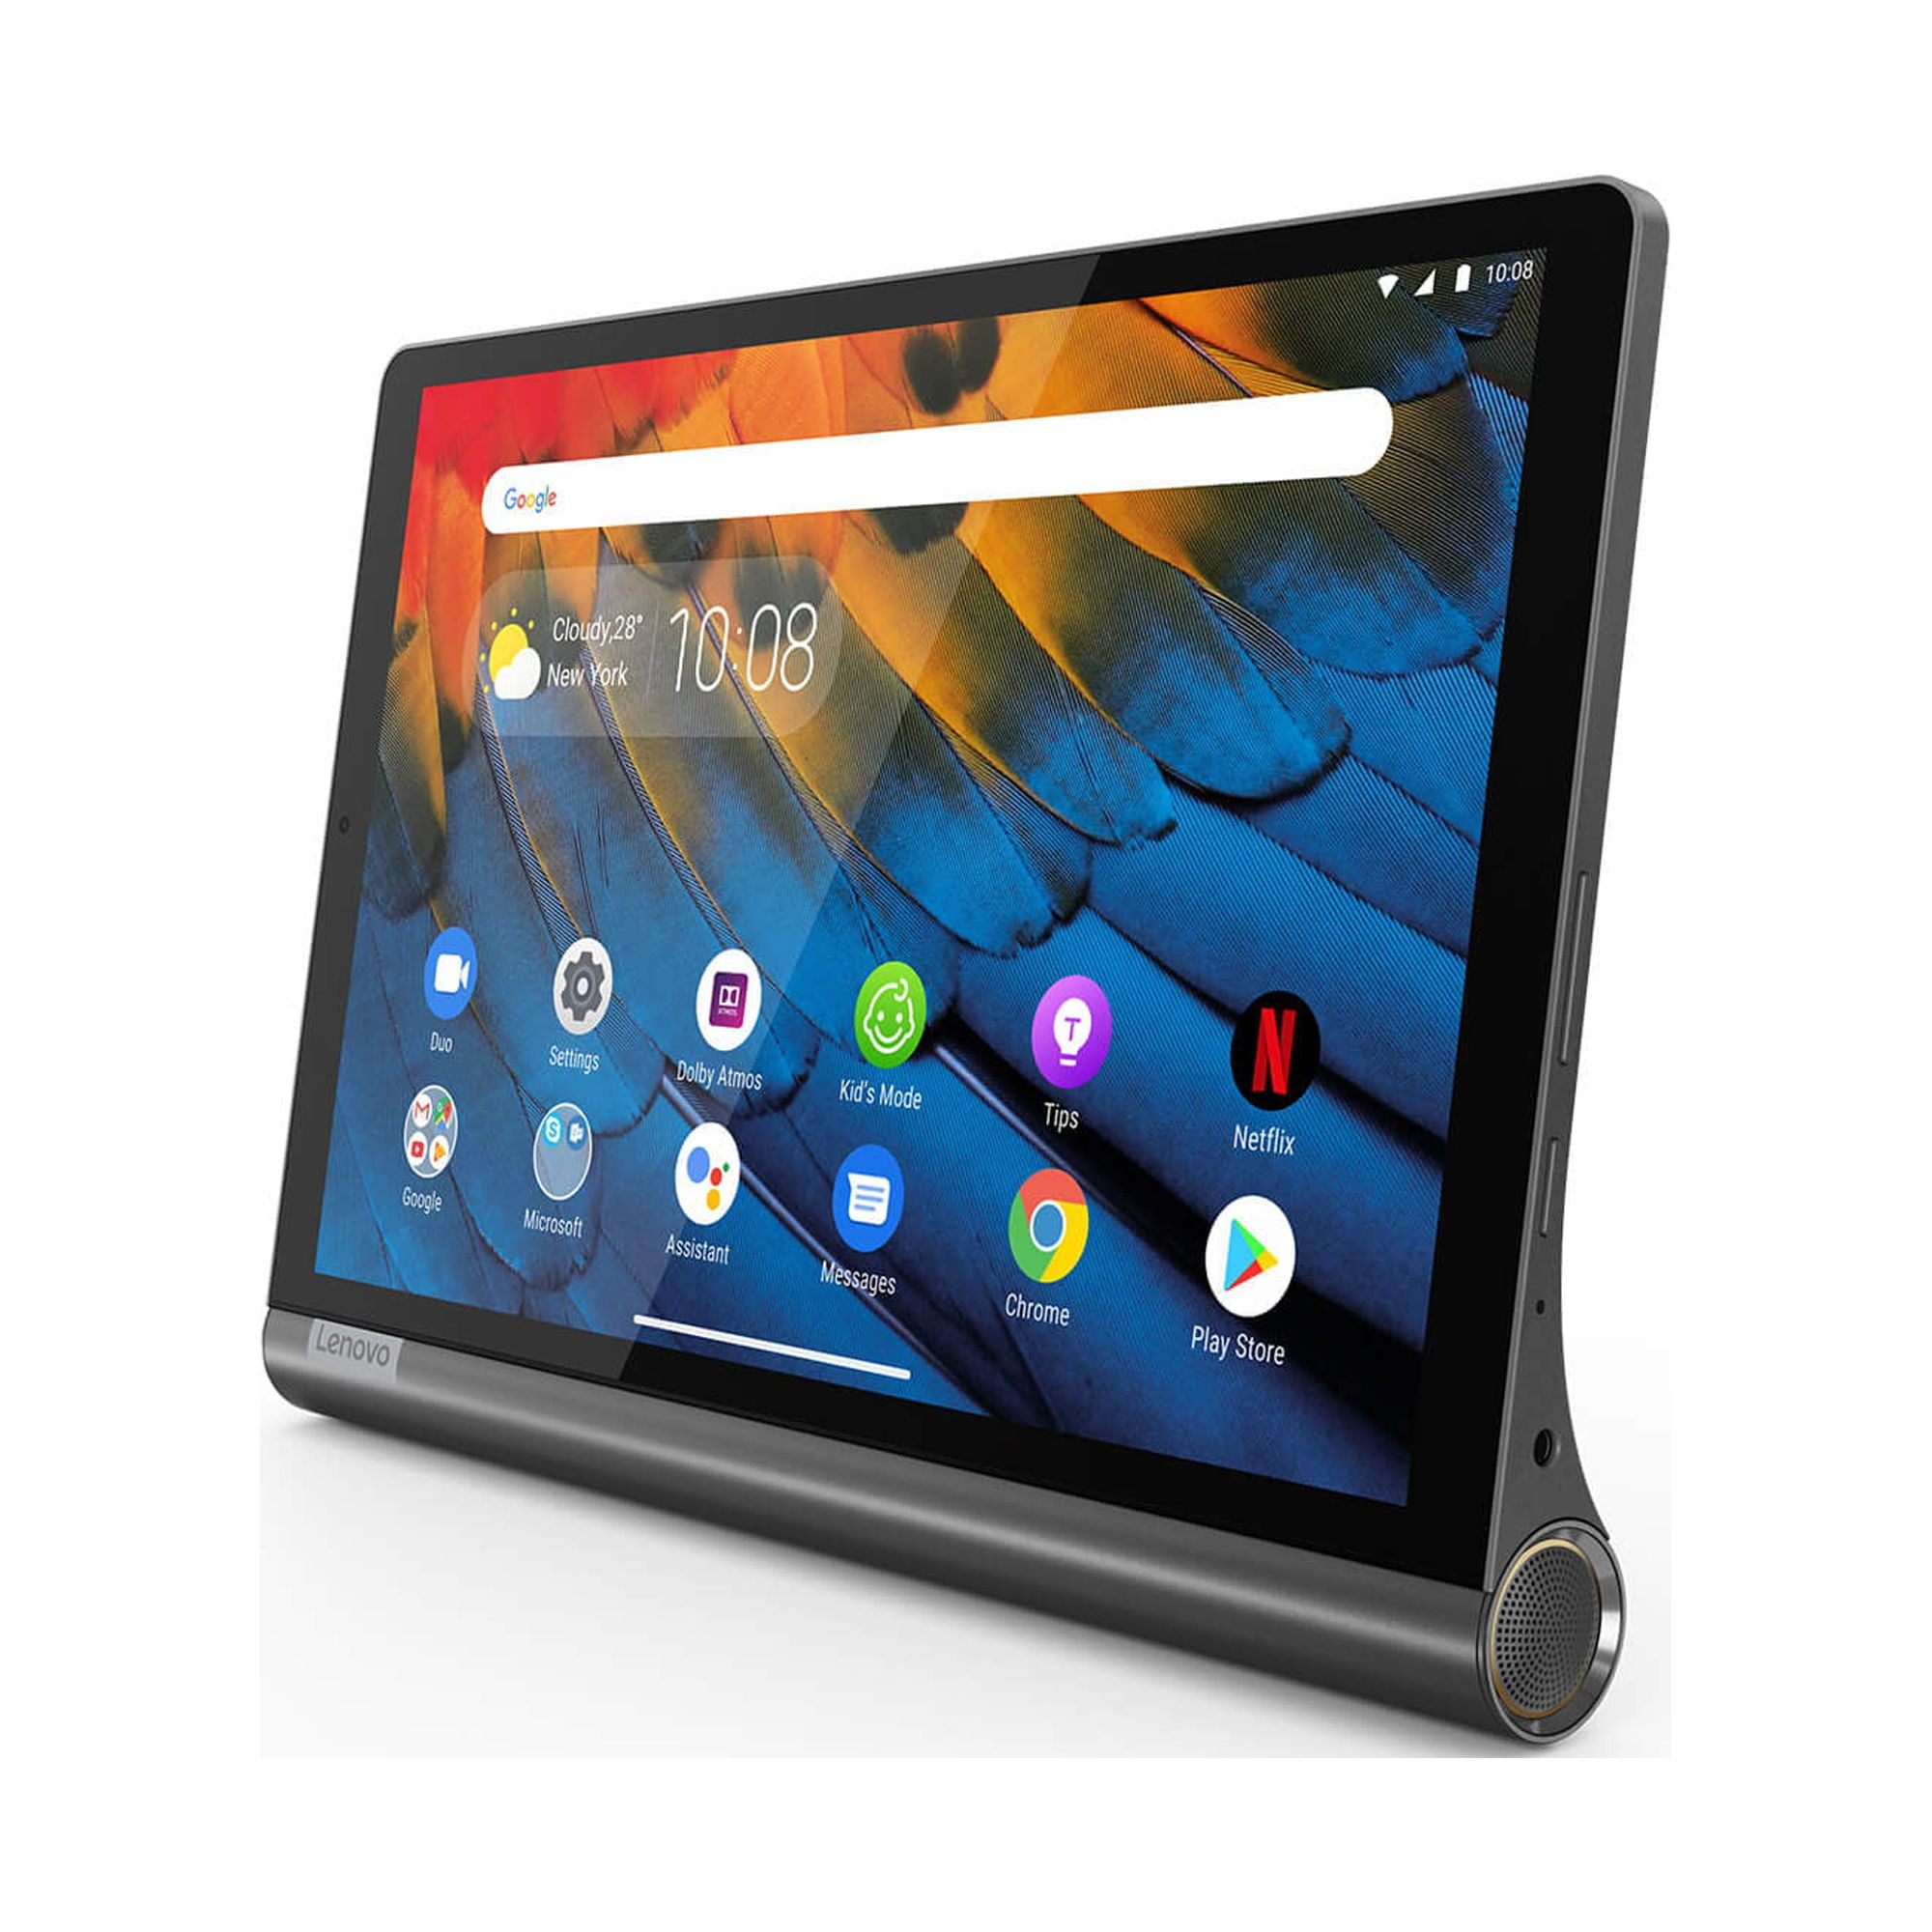 Lenovo Tab Yoga Smart Tablet with The Google Assistant (10.1 inch/25.65 cm,  4GB, 64GB, Wi-Fi + 4G LTE, Calling), Iron Grey